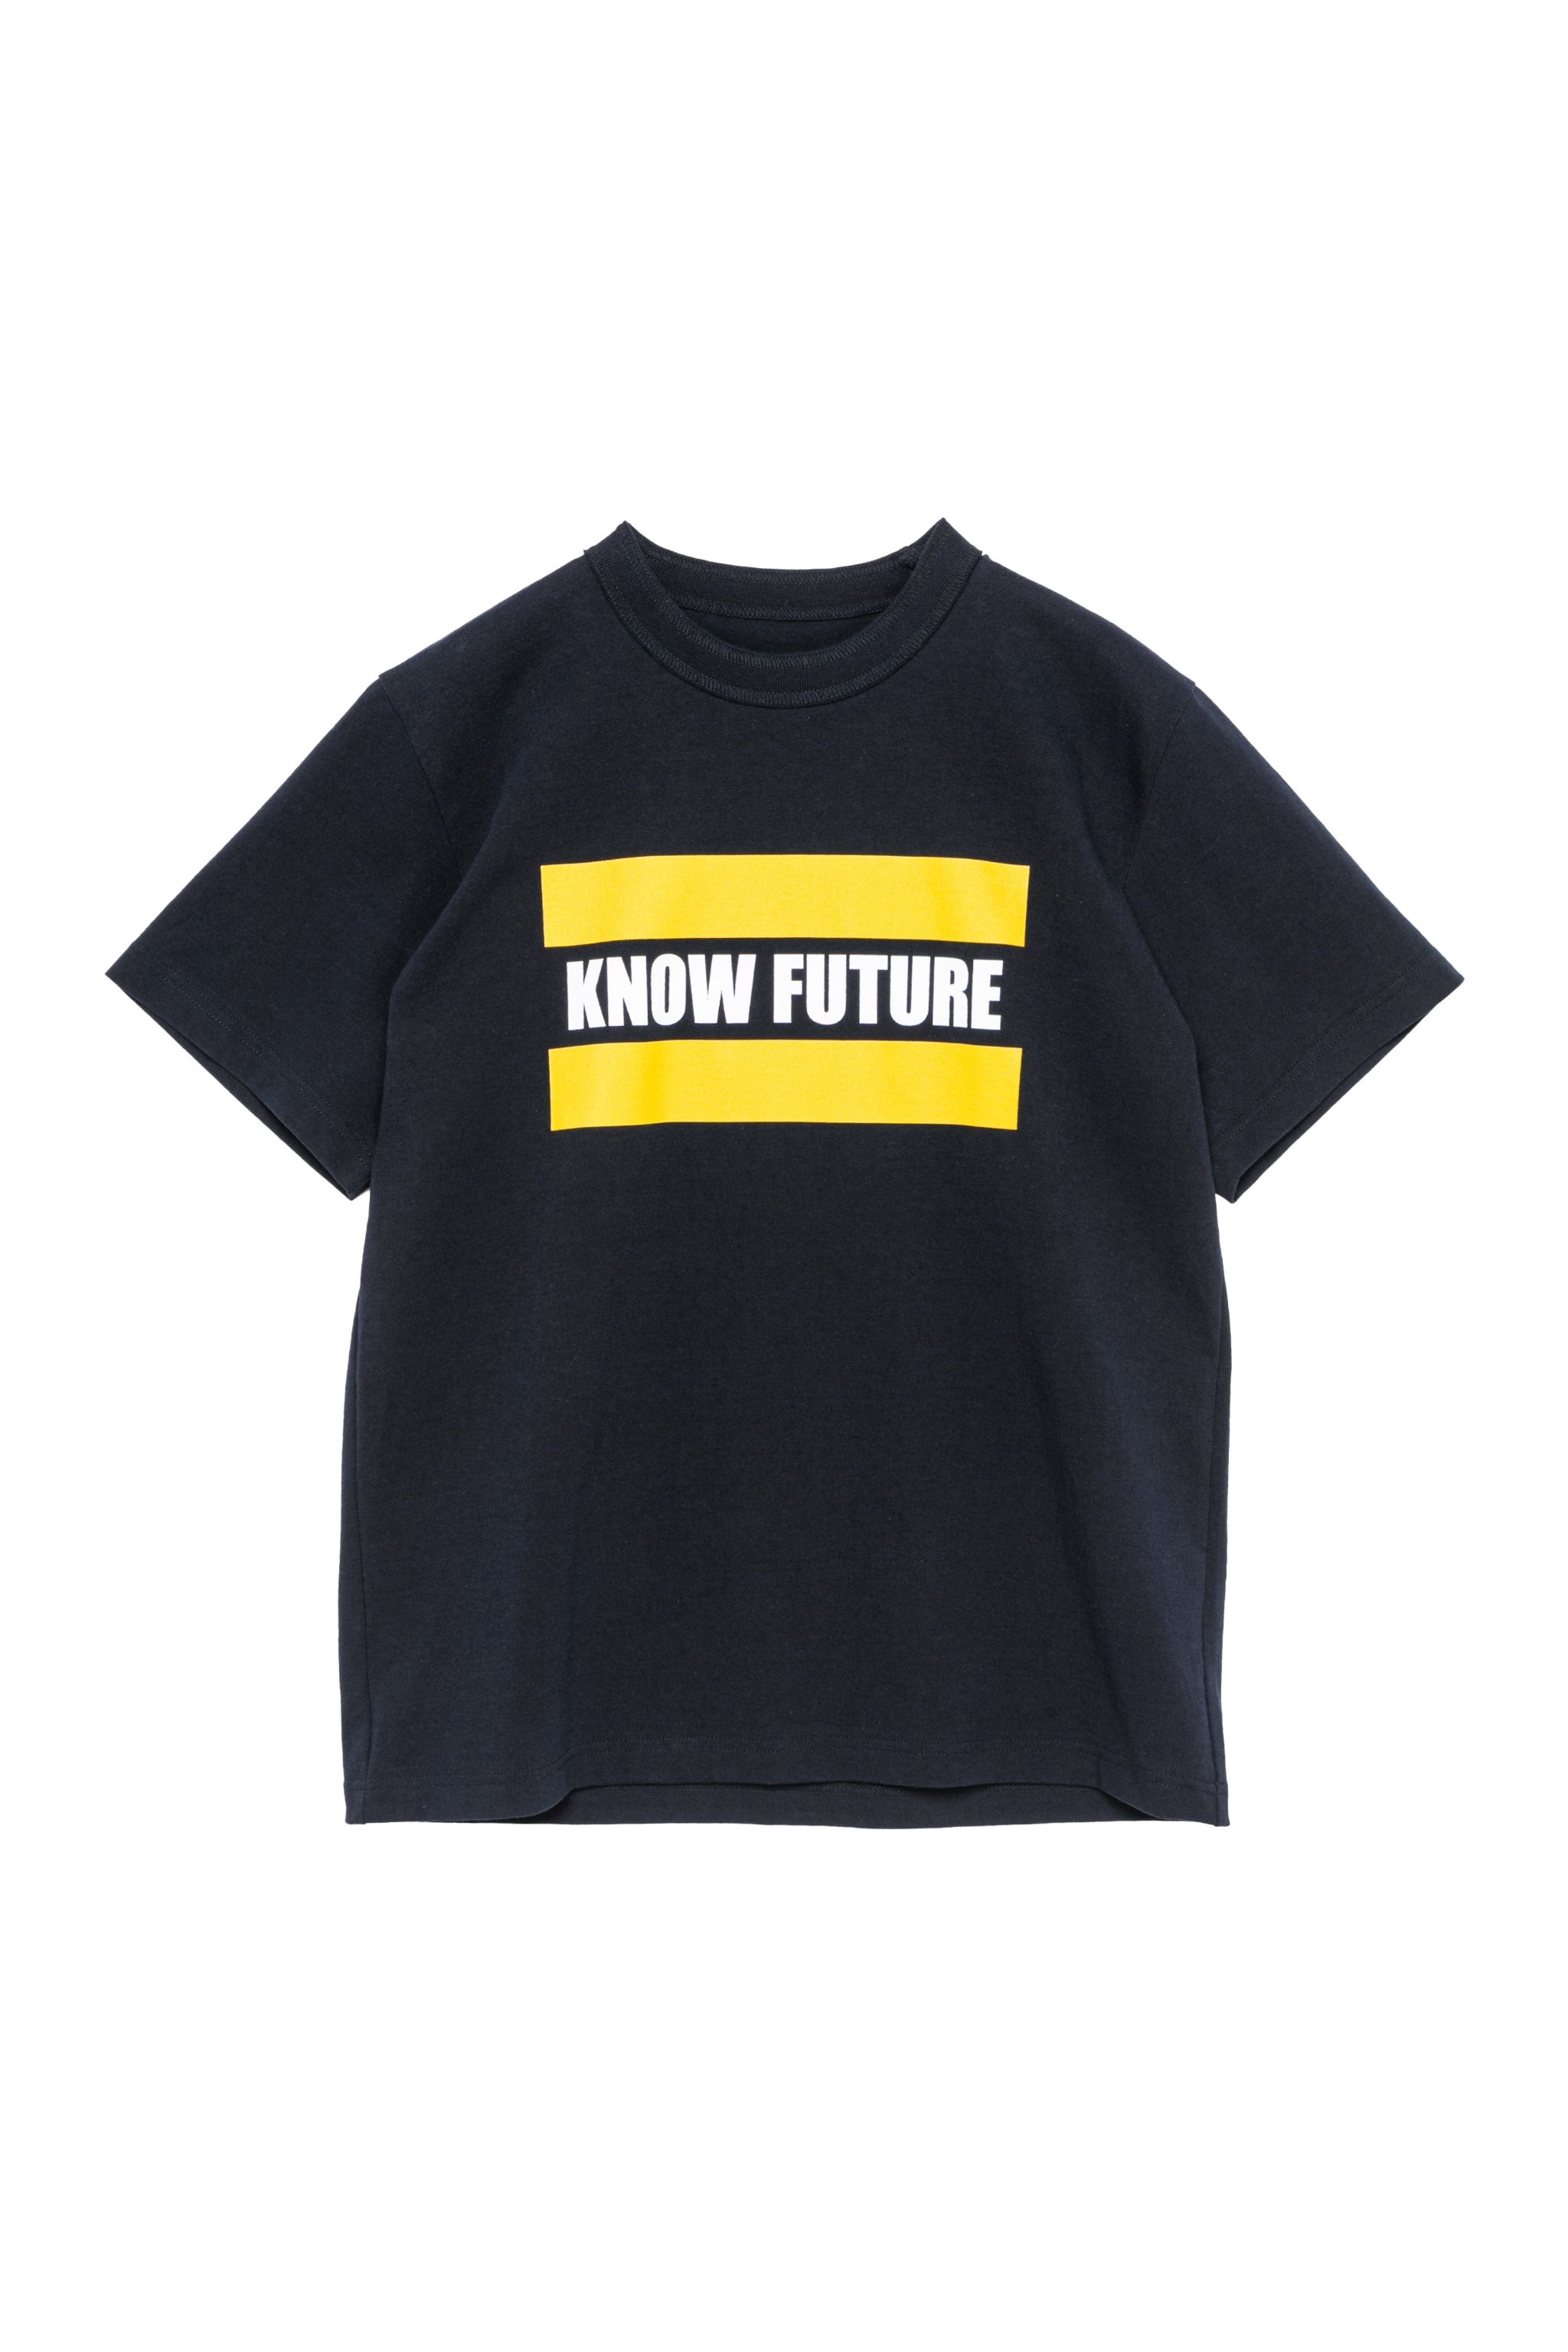 KNOW FUTURE T-Shirt - 1